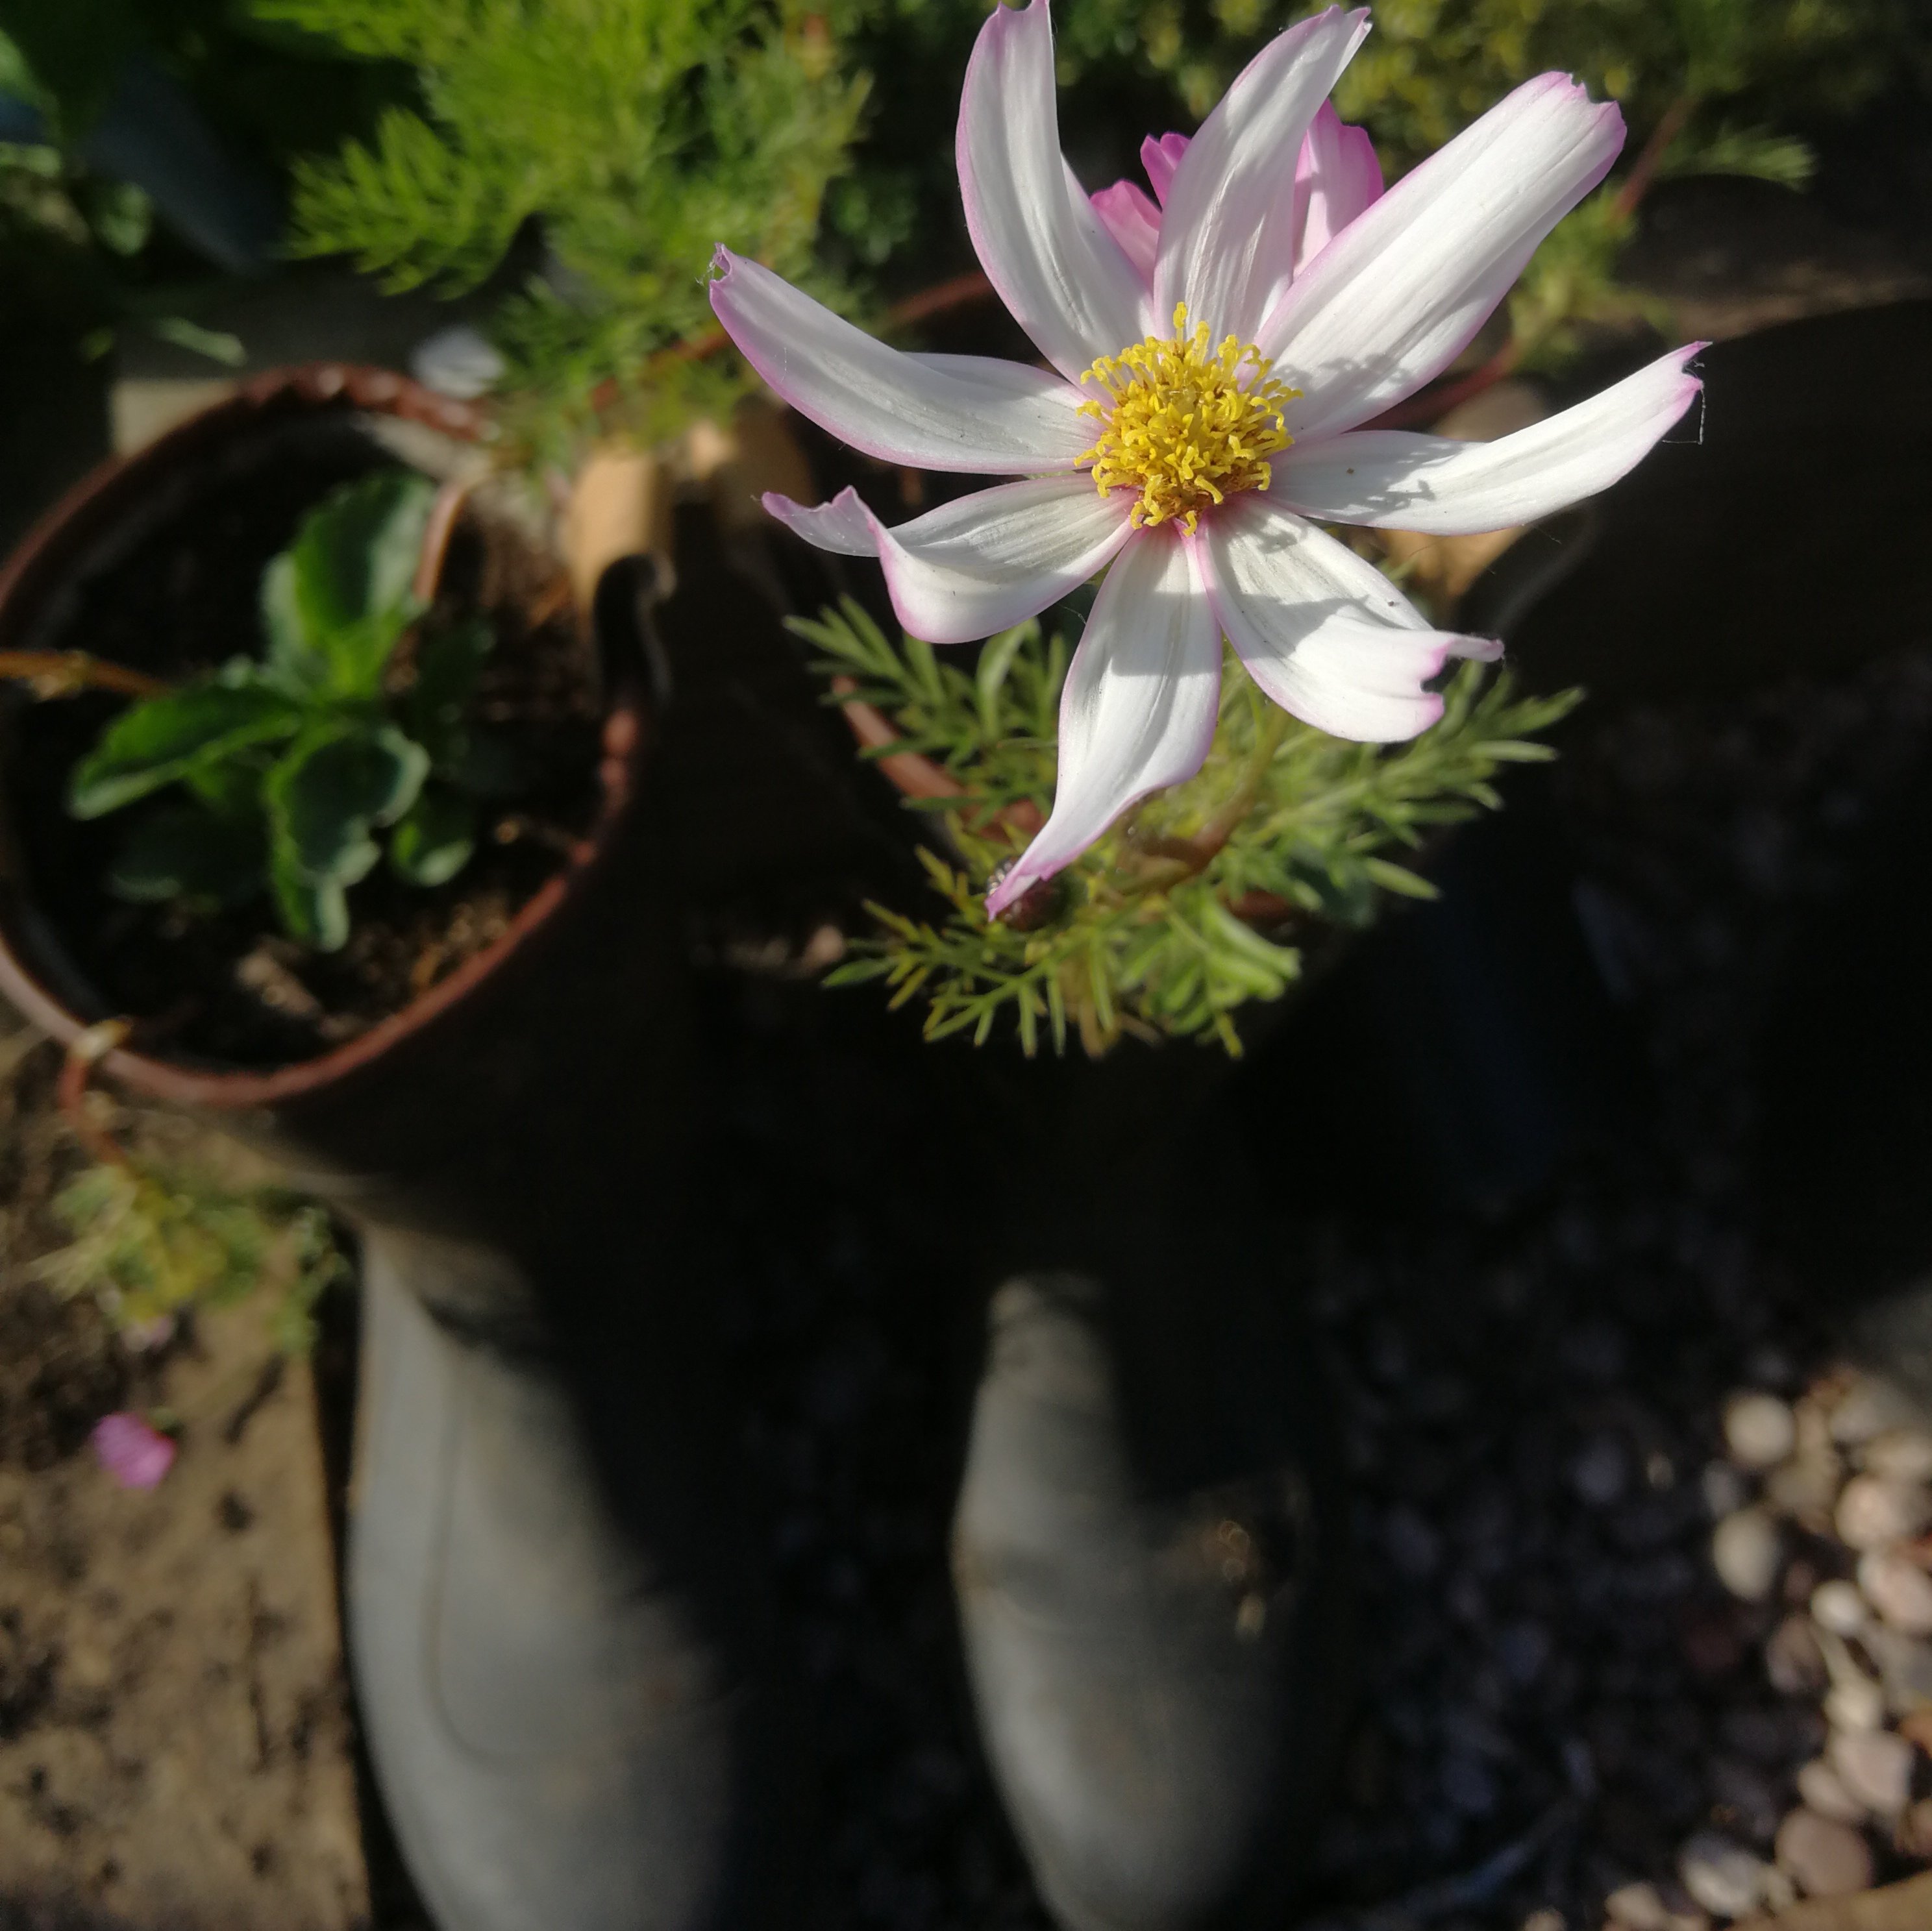 Open cosmos flower, grown in old wellies (seen in the background)